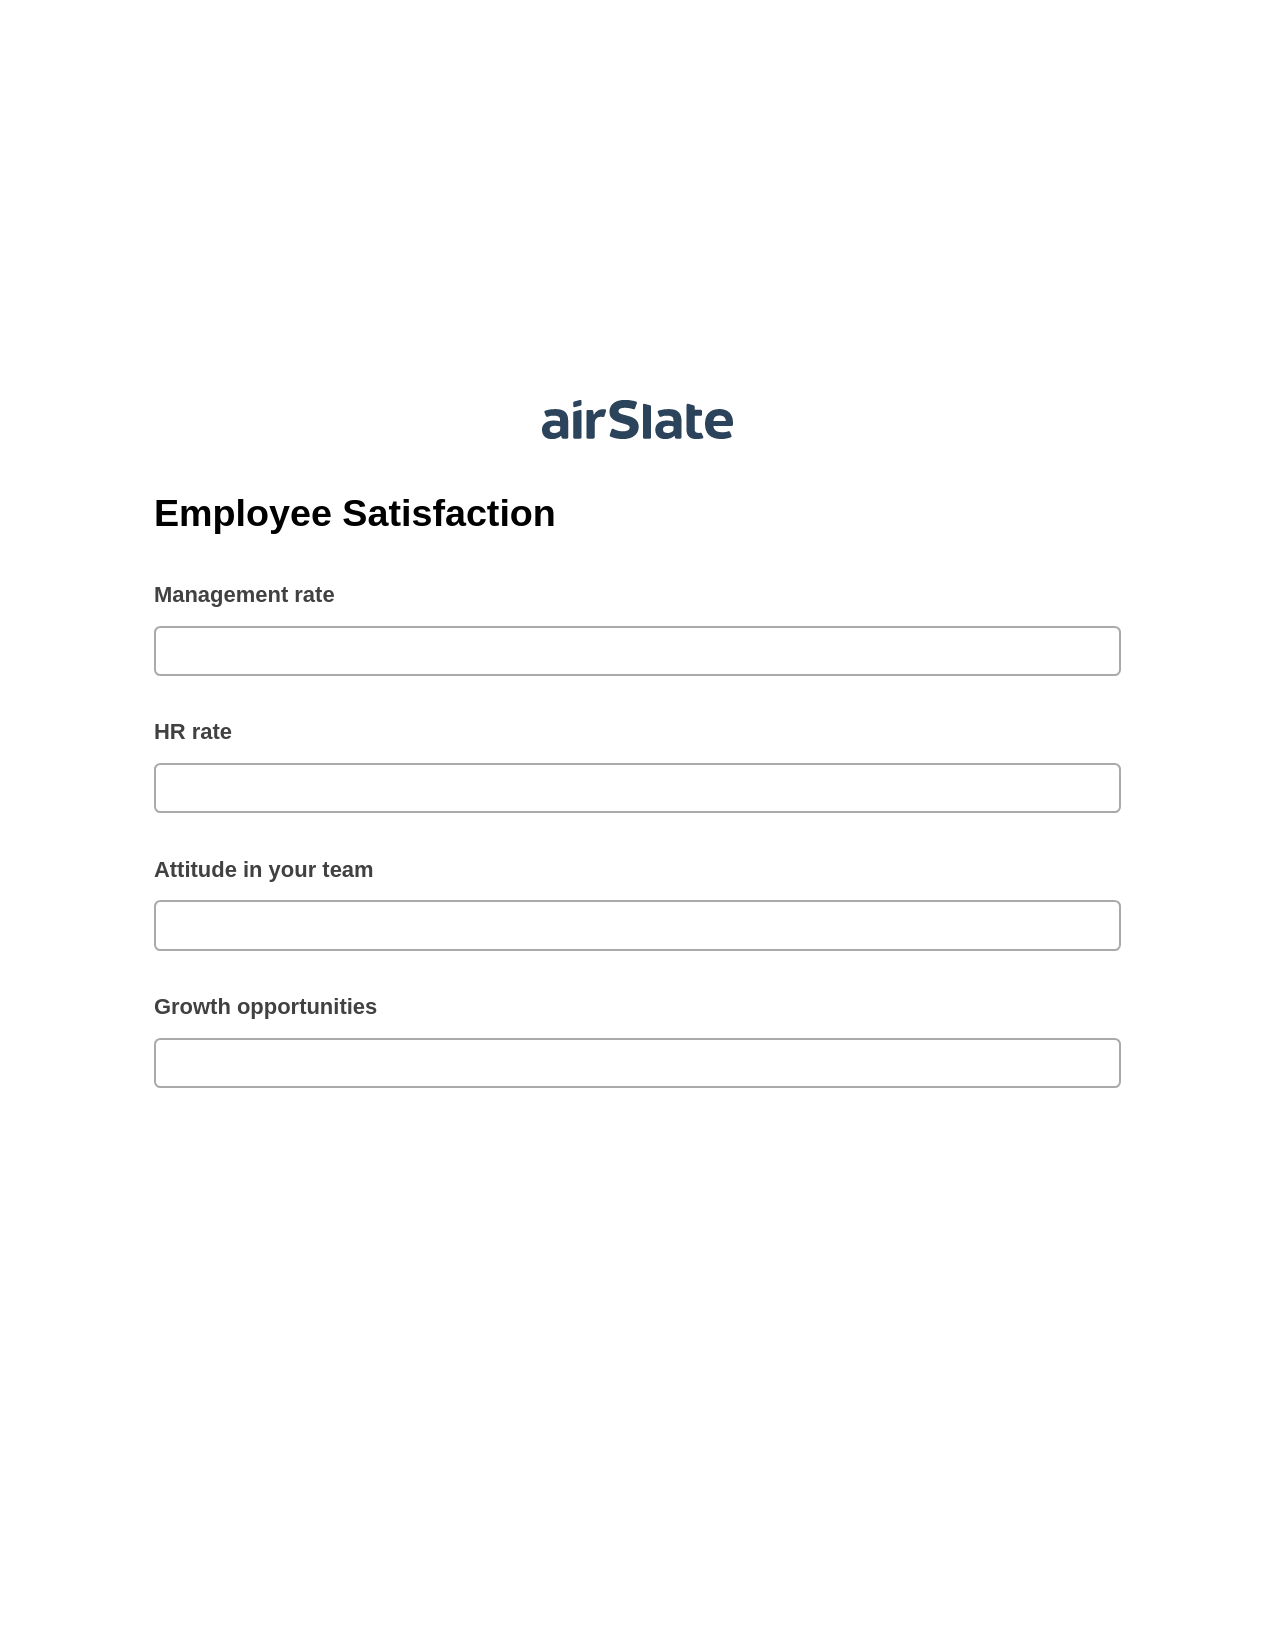 Employee Satisfaction Pre-fill from CSV File Bot, Open as Role Bot, Export to Formstack Documents Bot